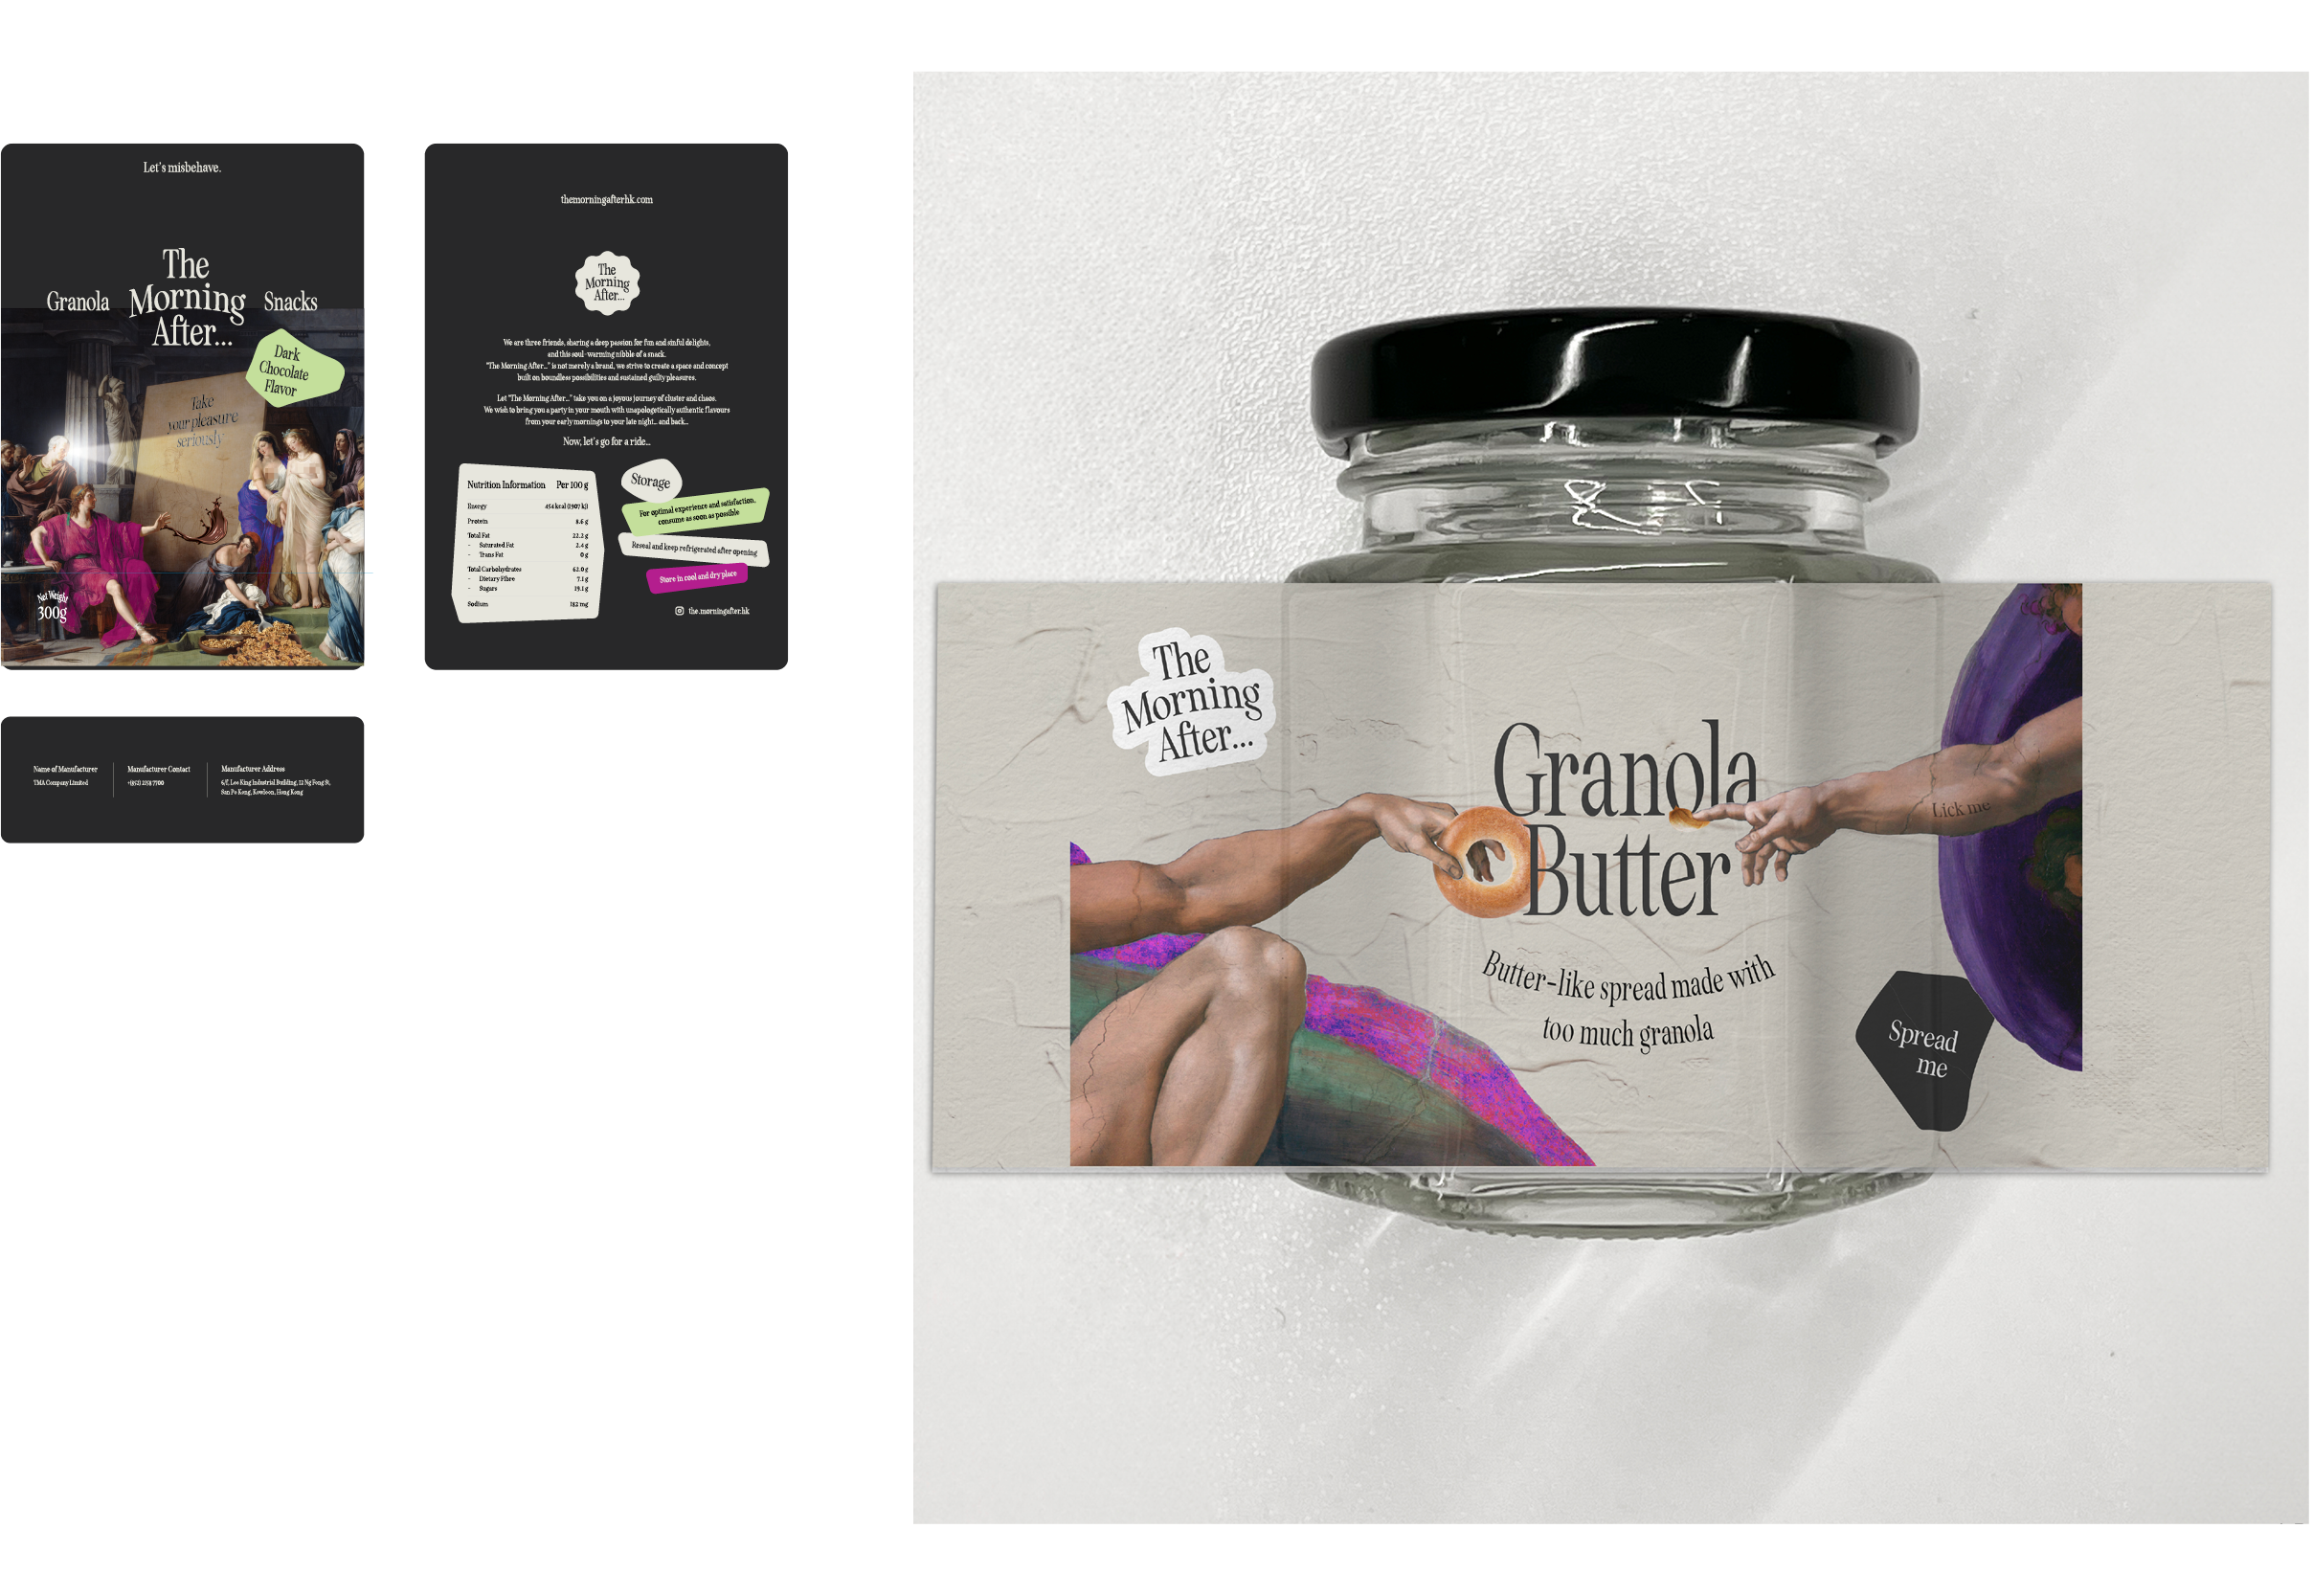 Packaging dieline of granola bag, and label for granola butter